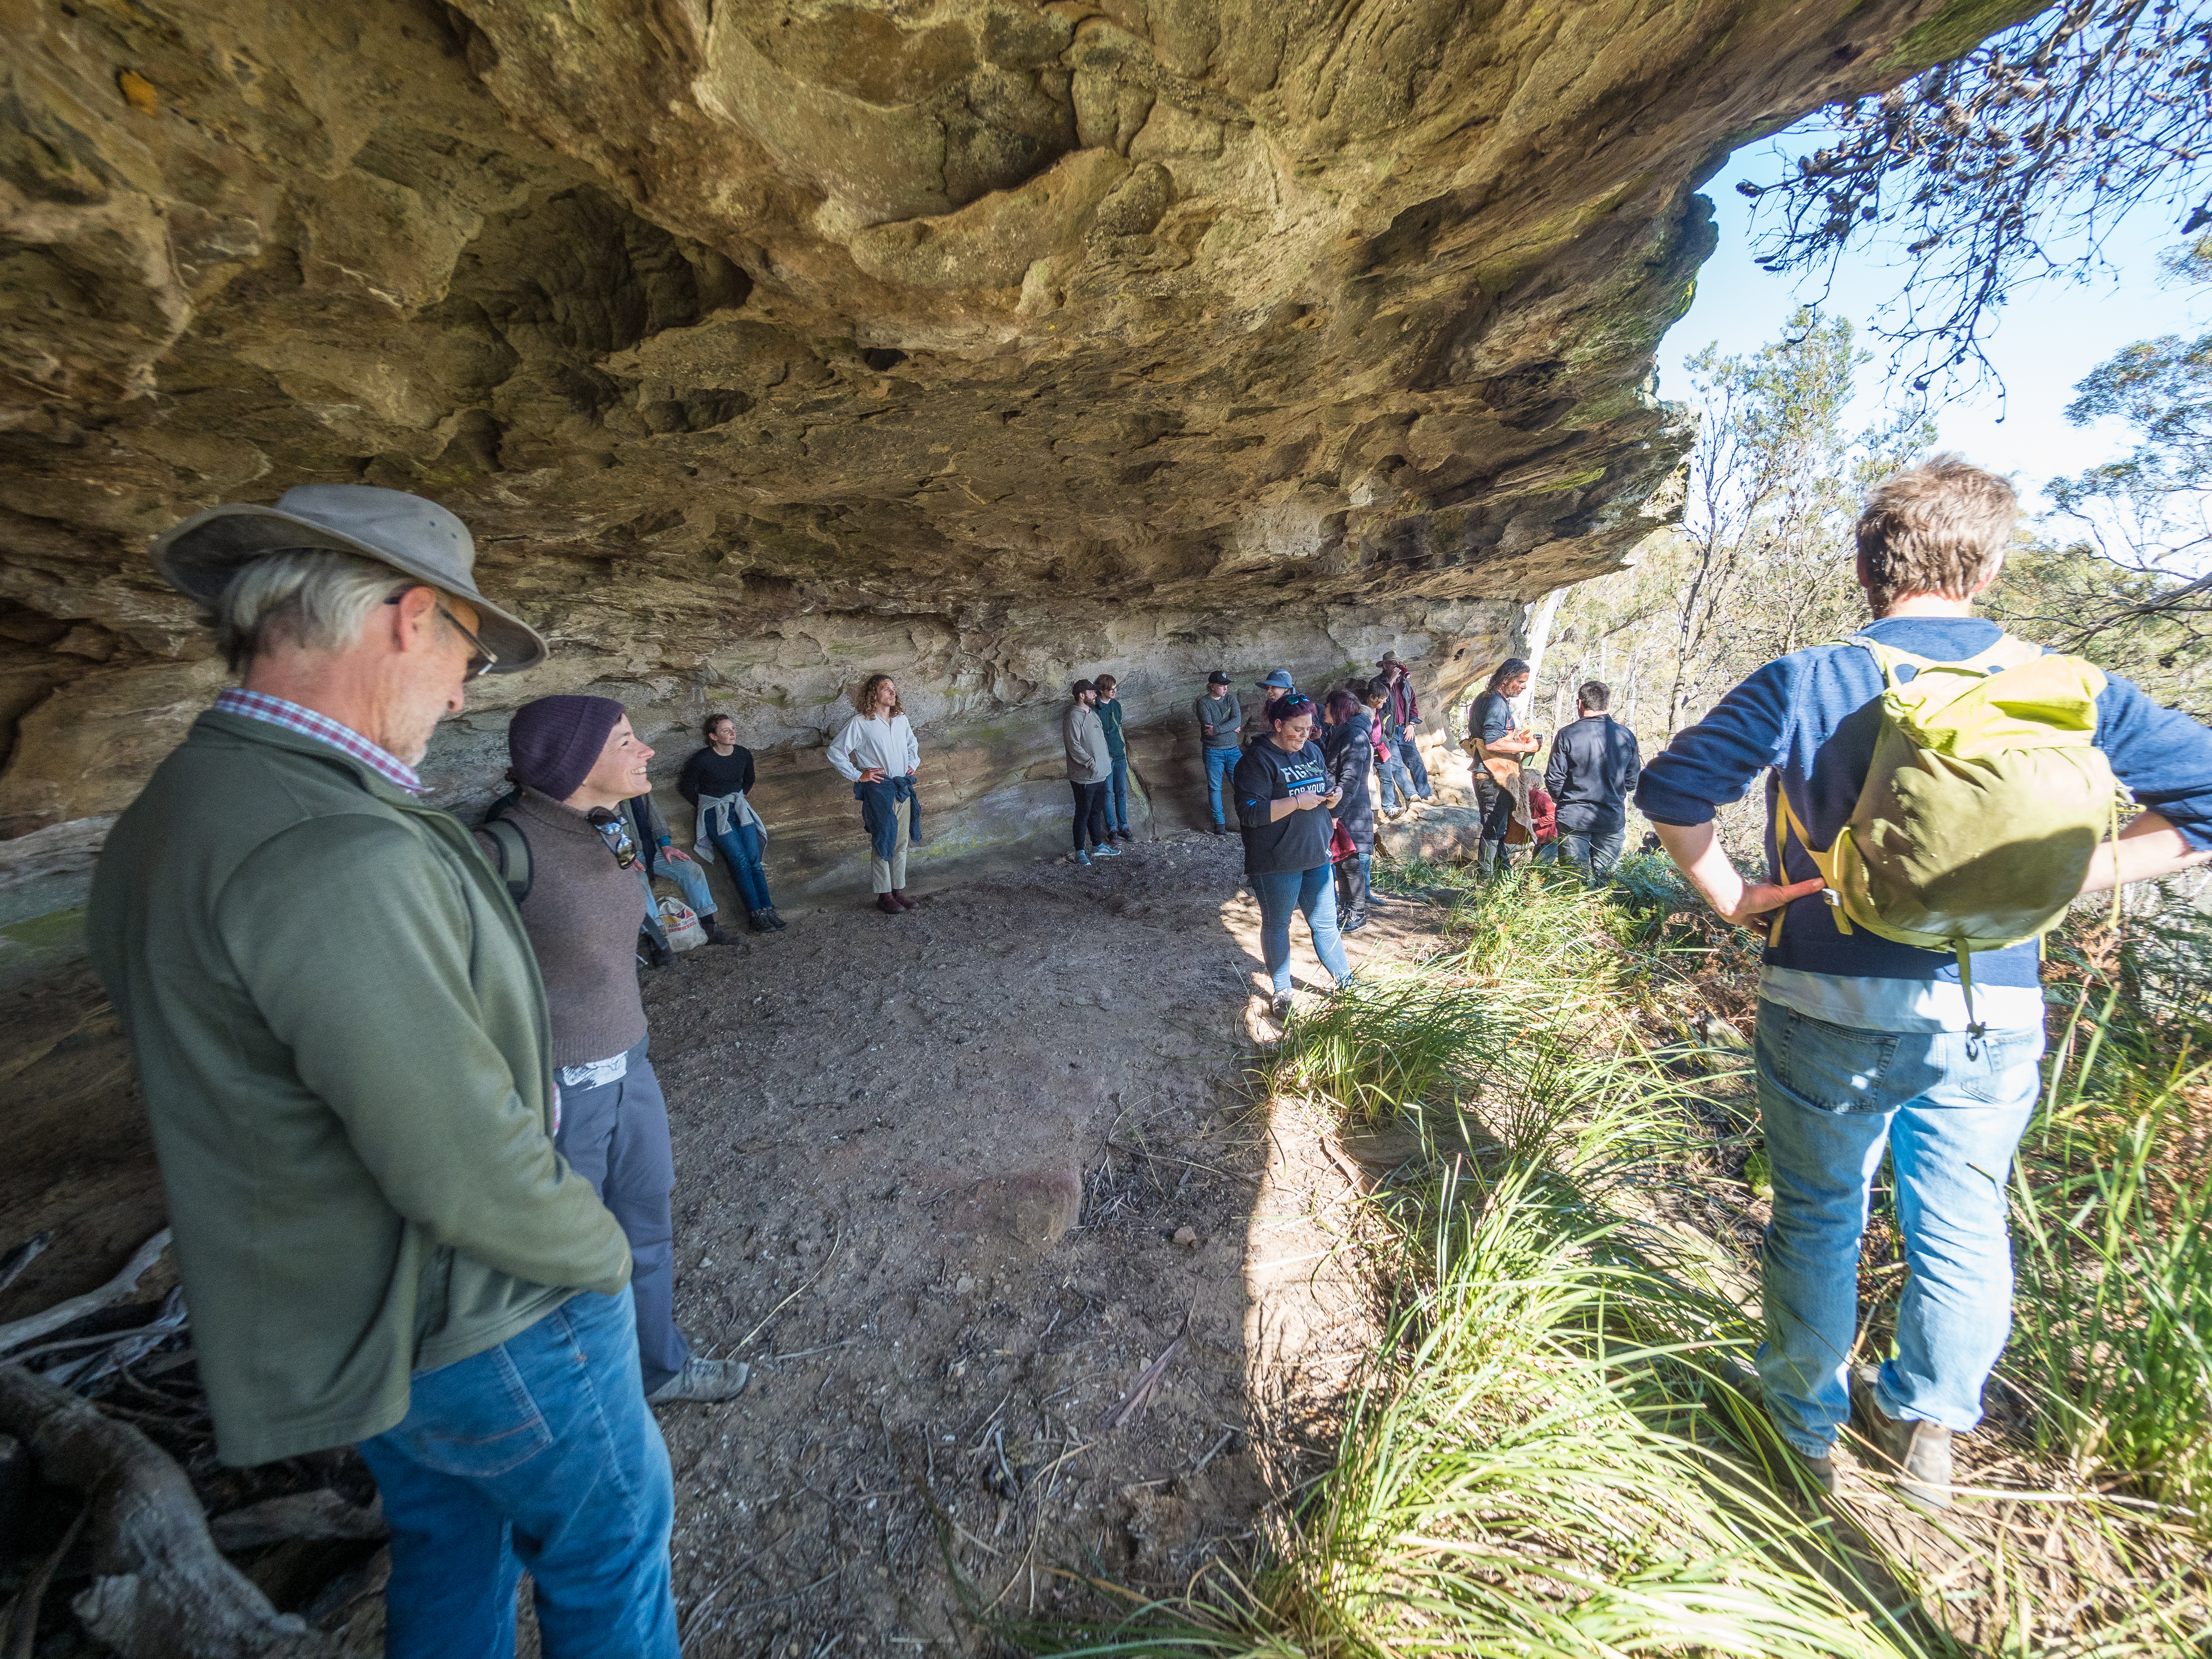  The group inspecting caves on the property